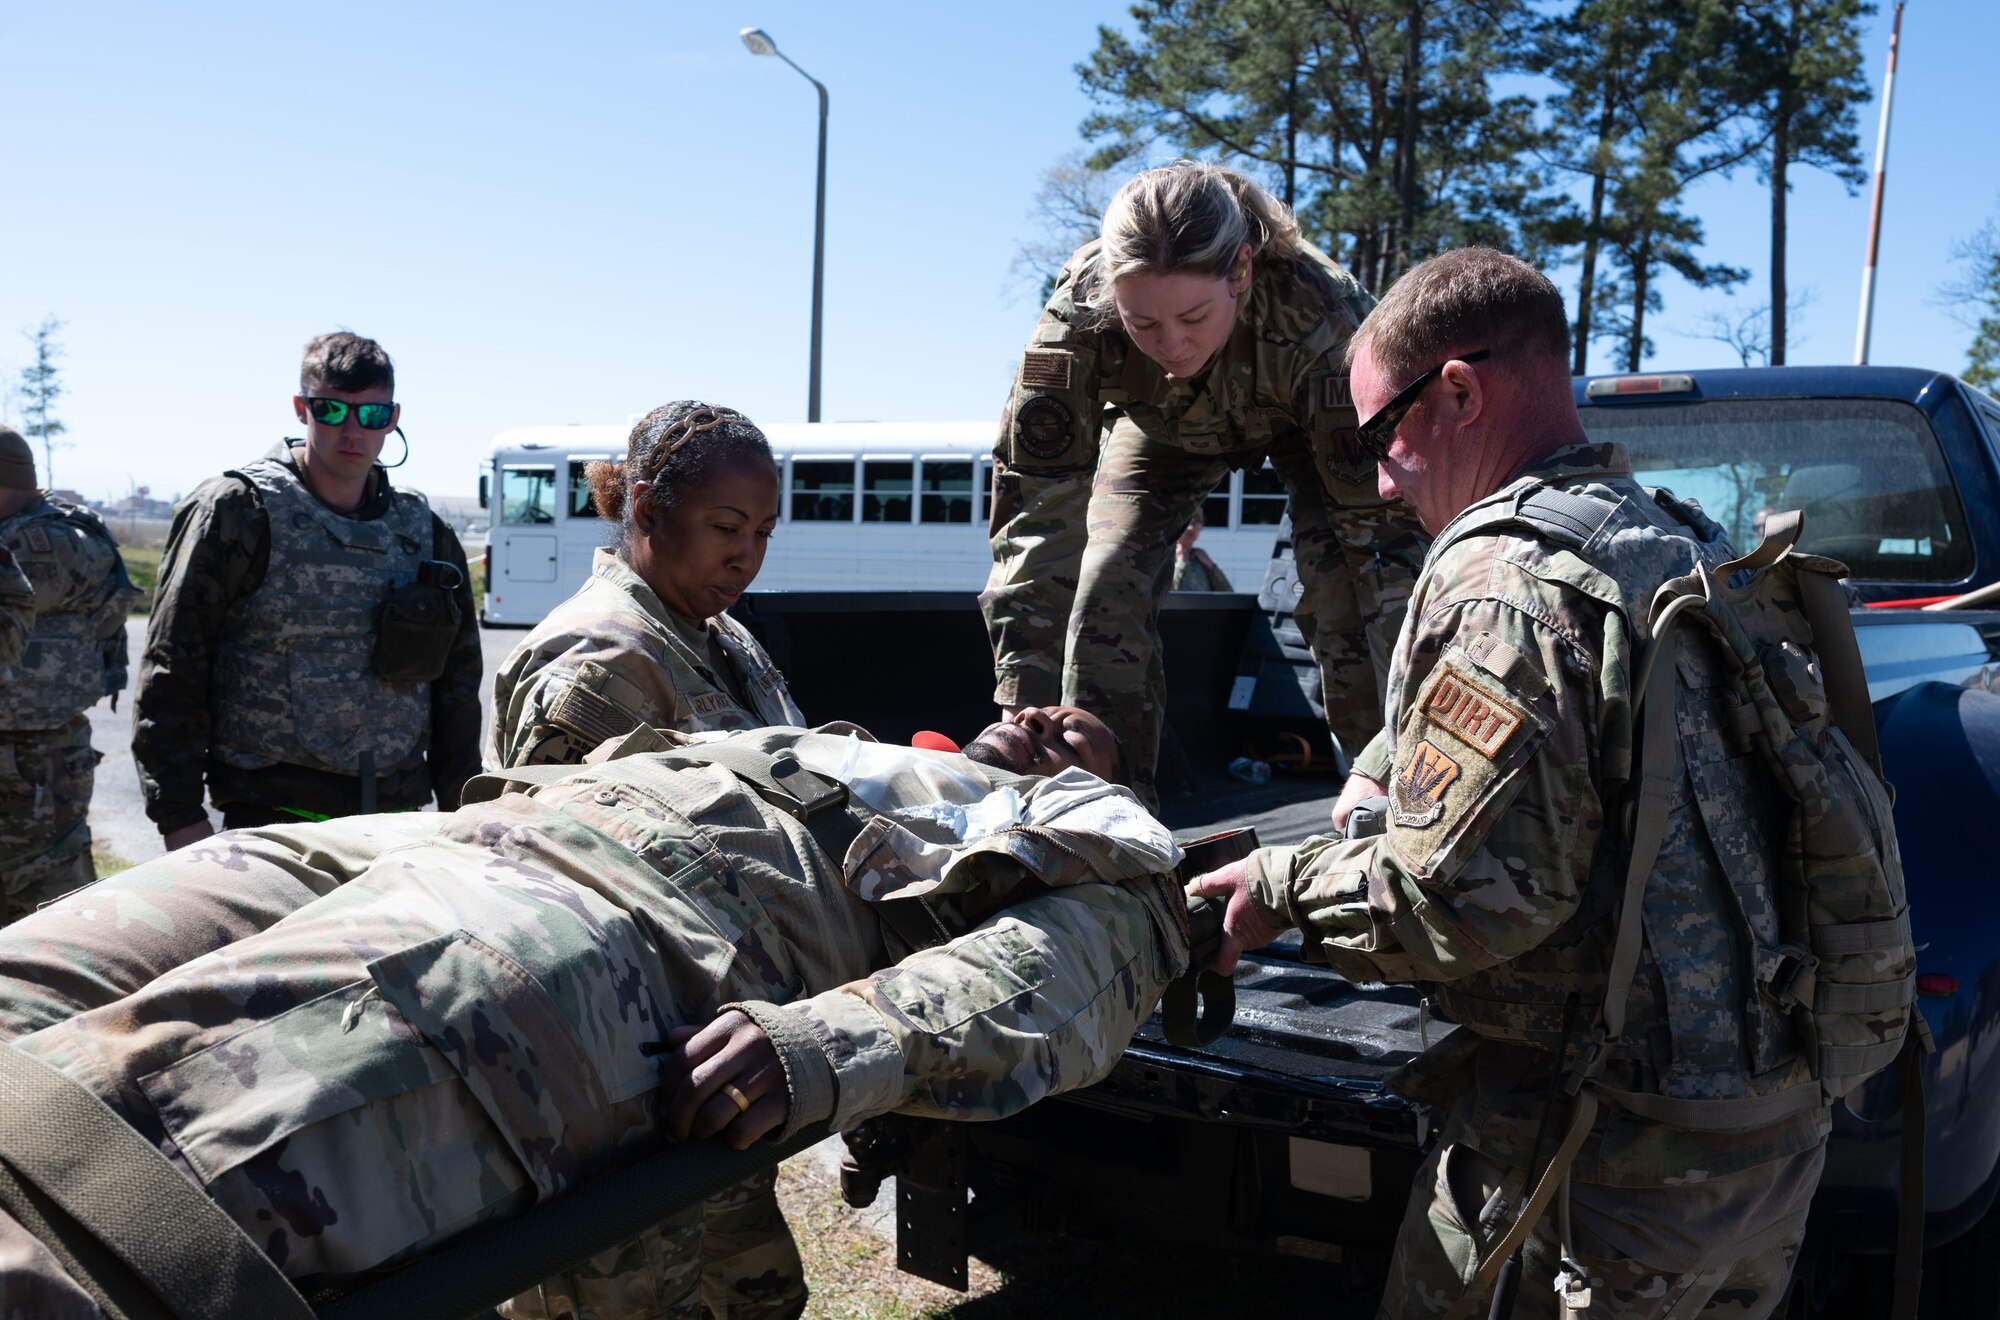 Airmen assigned to the 4th Fighter Wing load a simulated patient into a truck for aeromedical evacuation transport as part of a mass casualty event during exercise Agile Cub 4 at Marine Corps Air Station Cherry Point, North Carolina, March 8, 2023. The exercise scenario allowed medics assigned to the 4th Medical Group to receive advanced combat medical training in a deployed environment to ensure they are ready for any incident. This agile combat employment exercise shifts the generation of airpower from large, centralized bases to networks of smaller, dispersed locations.